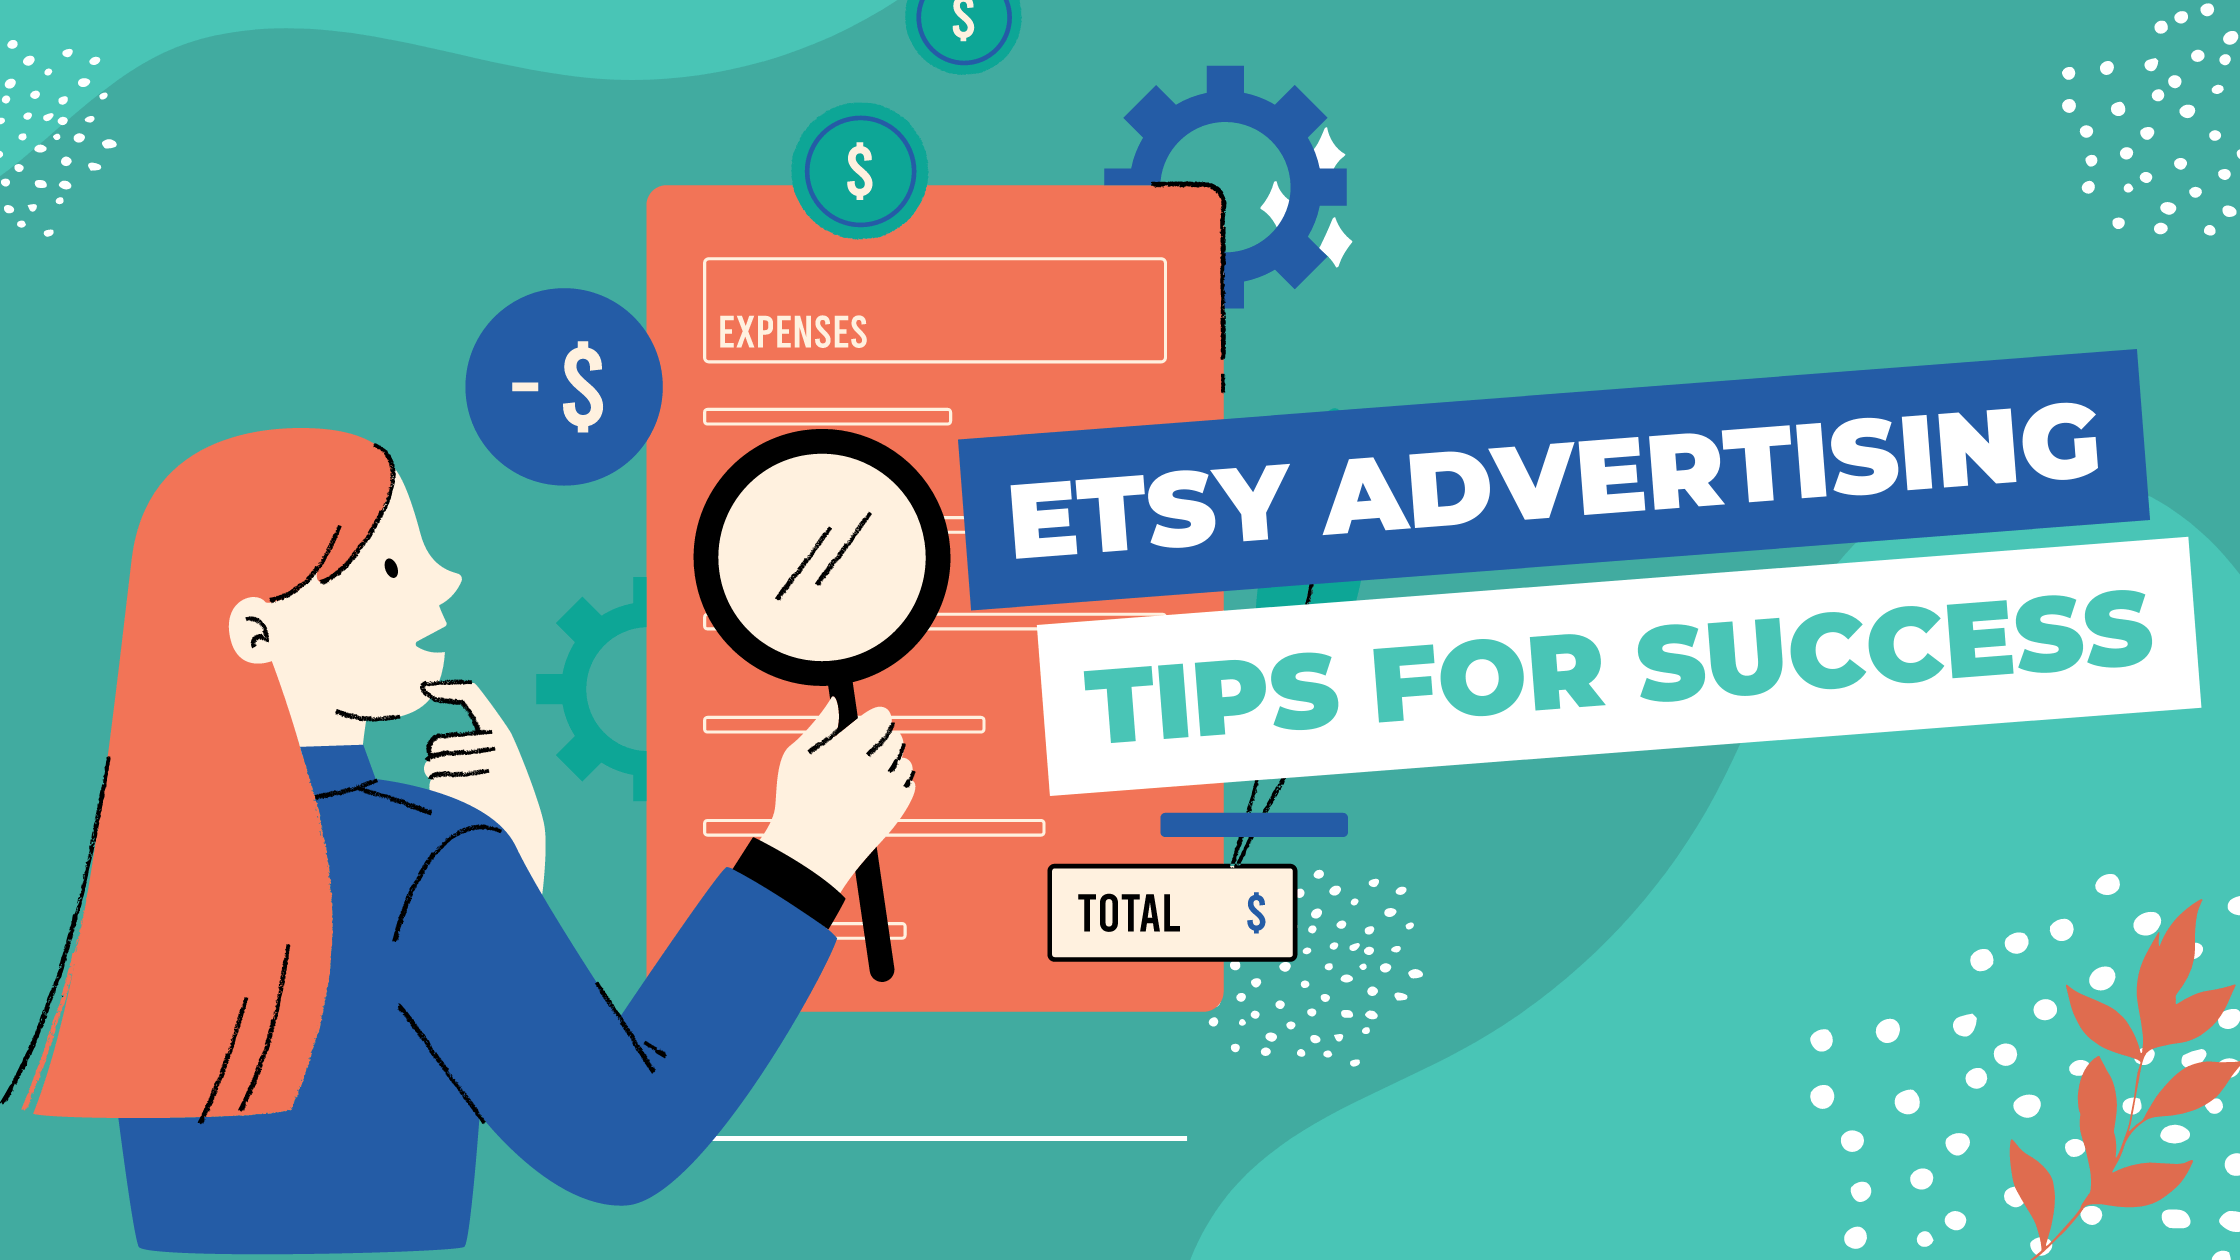 Etsy Advertising 101: A Beginner's Guide to Promoting Your Etsy Shop